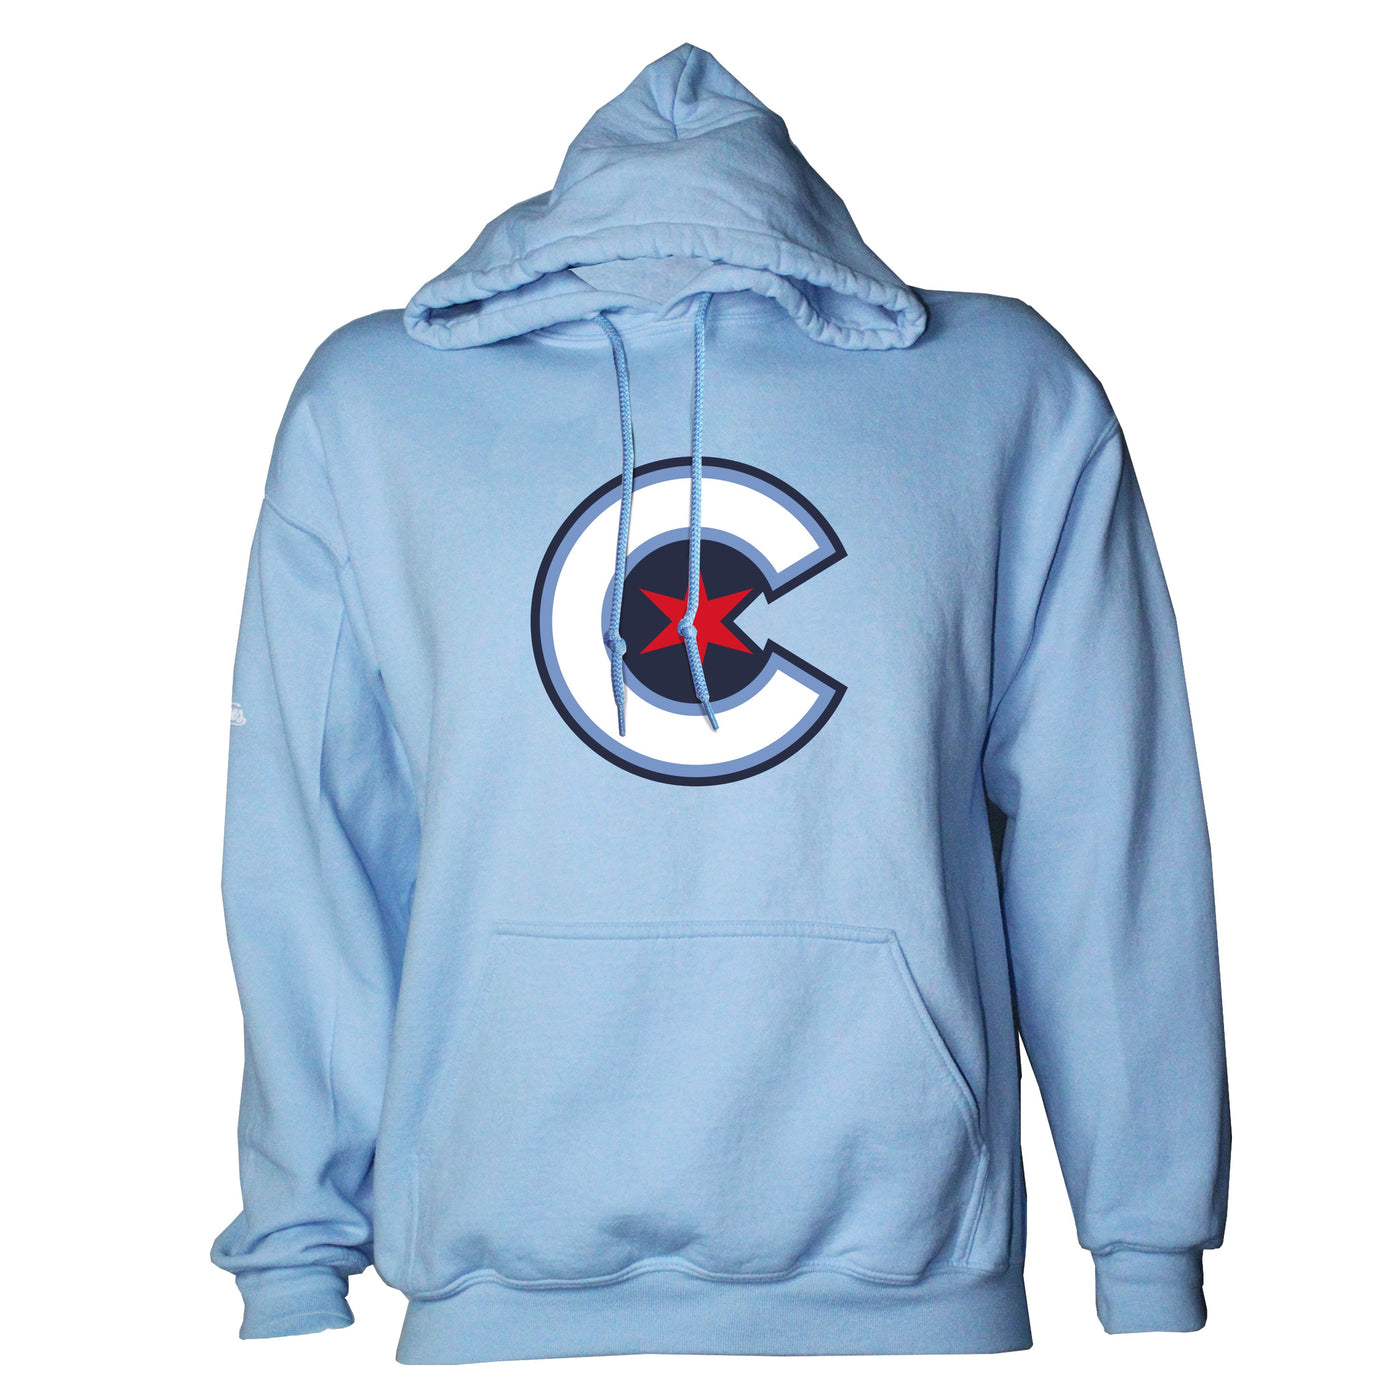 CHICAGO CUBS DYNASTY MEN'S CITY CONNECT LIGHT BLUE HOODIE